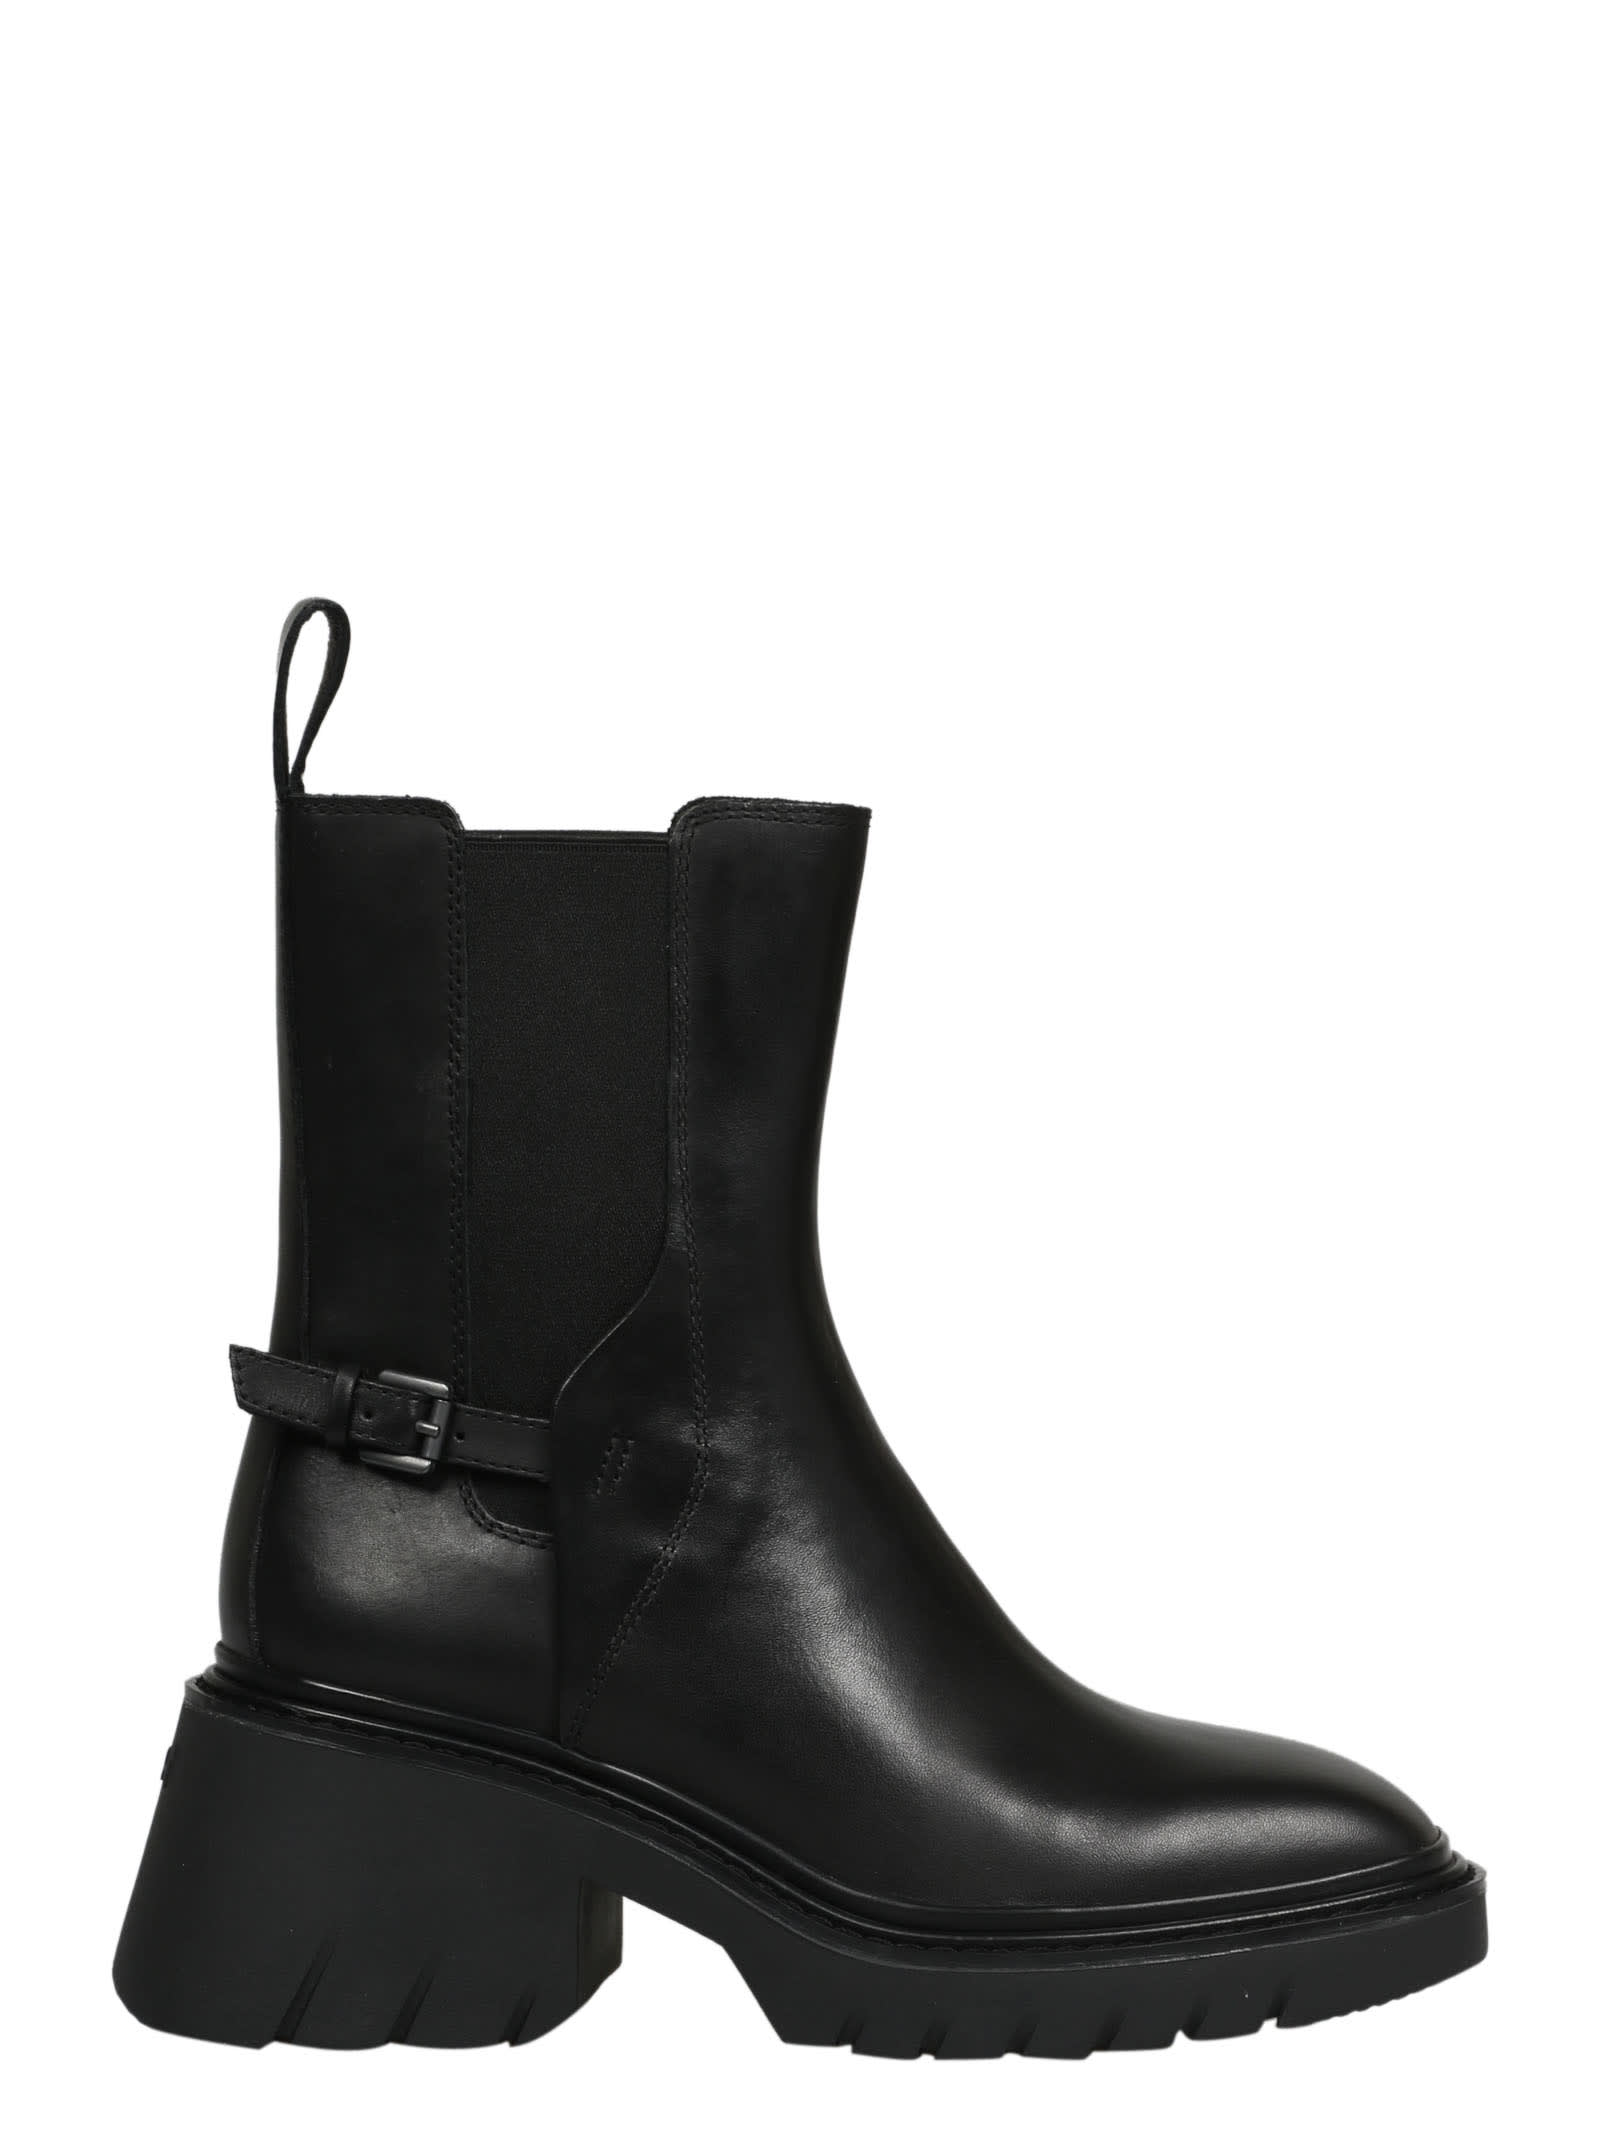 Ash Oxford Ankle Boots